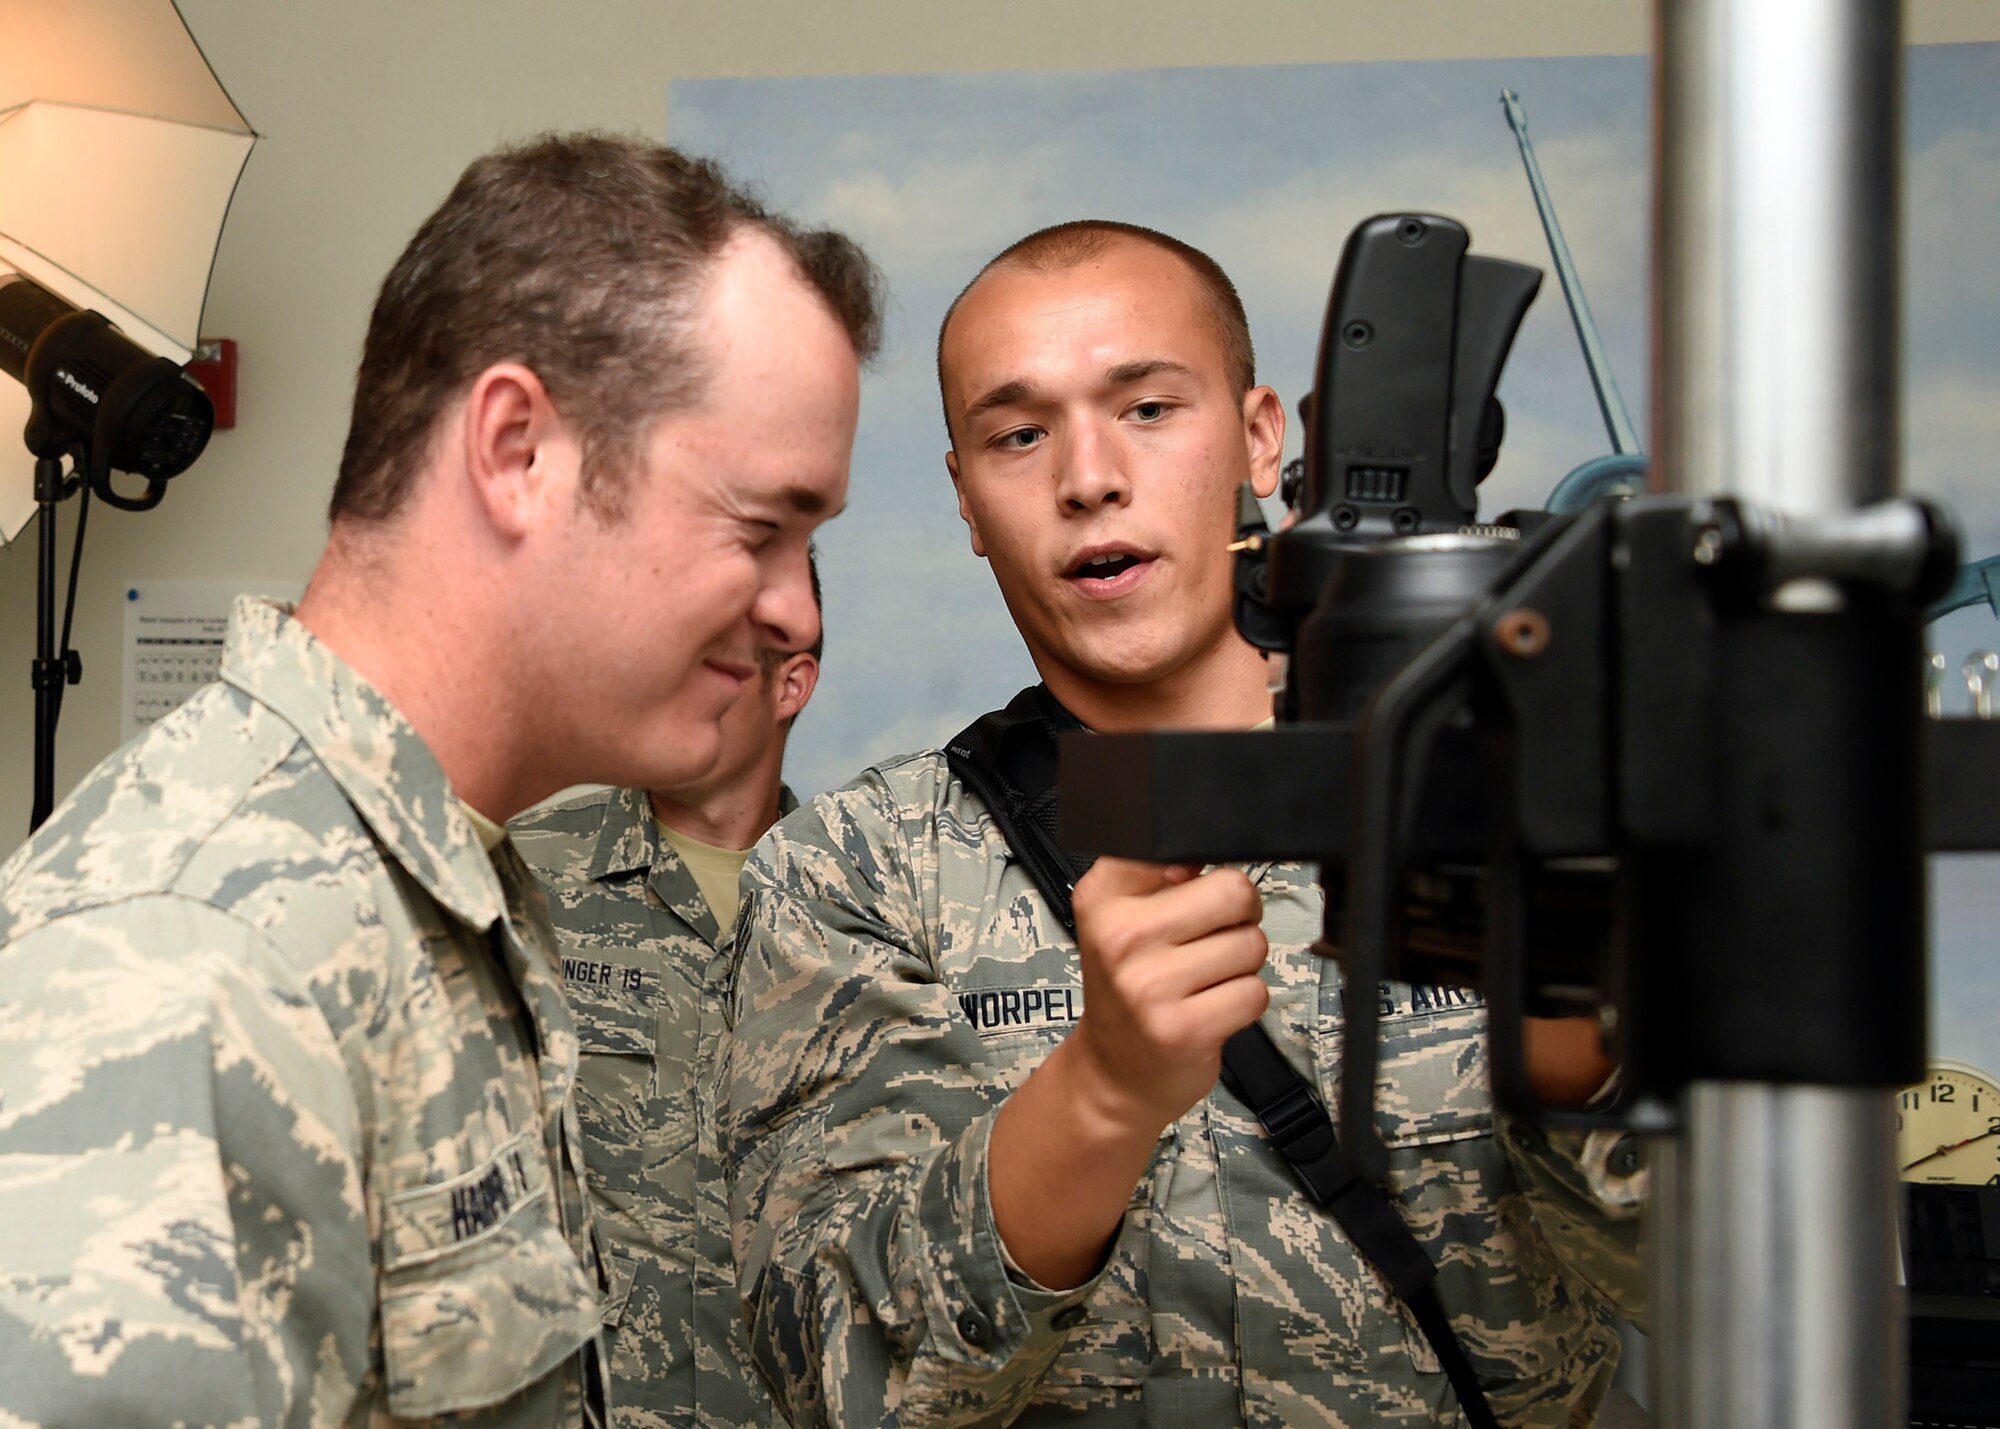 Airman 1st Class Caleb Worpel, 56th Fighter Wing photojournalist, shows a U.S. Air Force Academy cadet how to operate a camera during their tour July 31, 2017 at Luke Air Force Base, Ariz. Several cadets from the U.S. Air Force Academy received an in-depth look at how Luke achieves its mission of building the future of airpower. (U.S. Air Force photo by Senior Airman Devante Williams)  